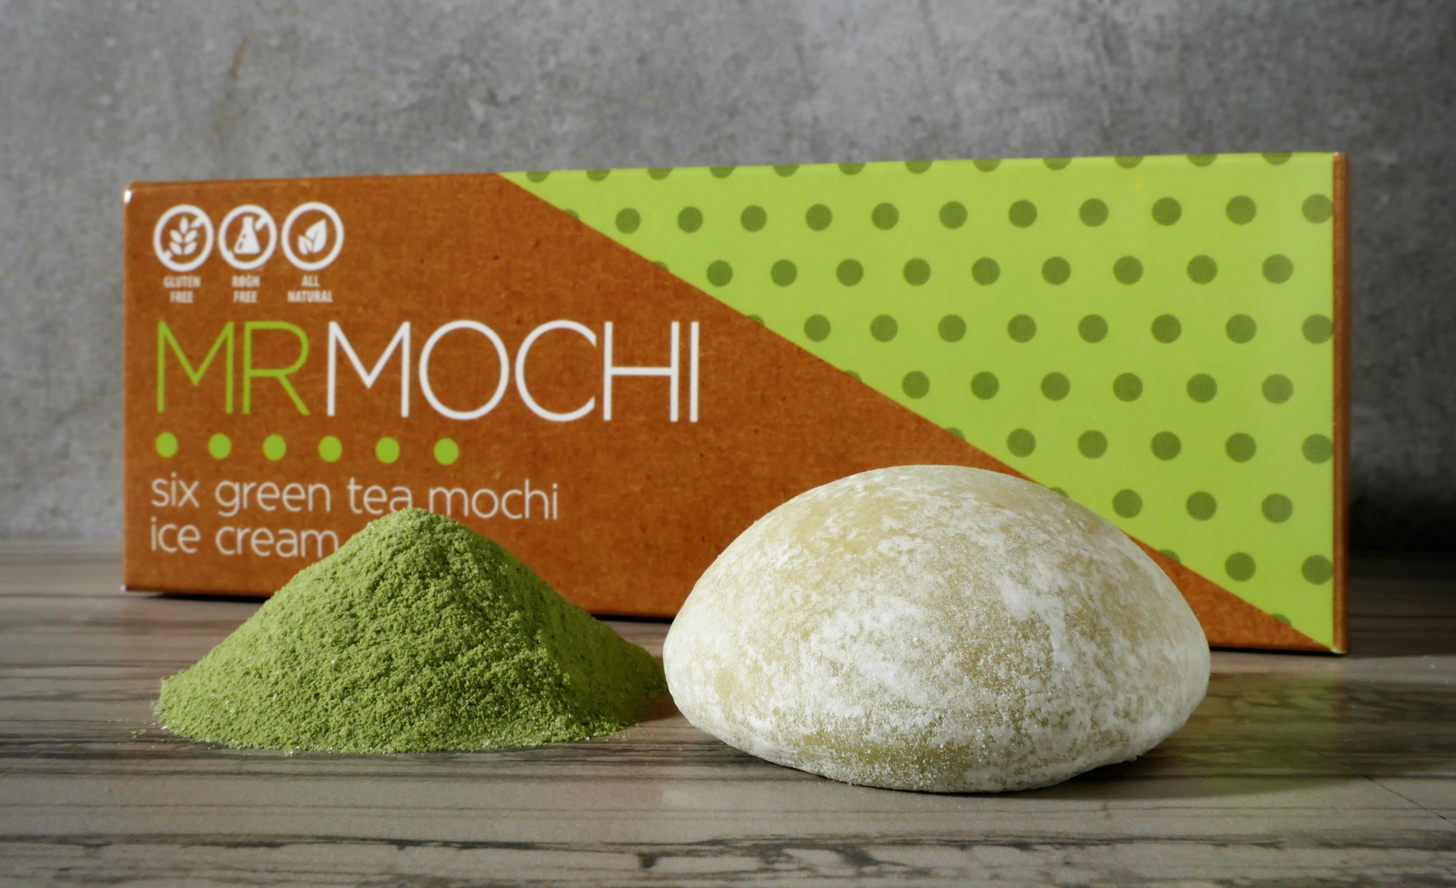 bnt-208a good quality commerical mochi ice